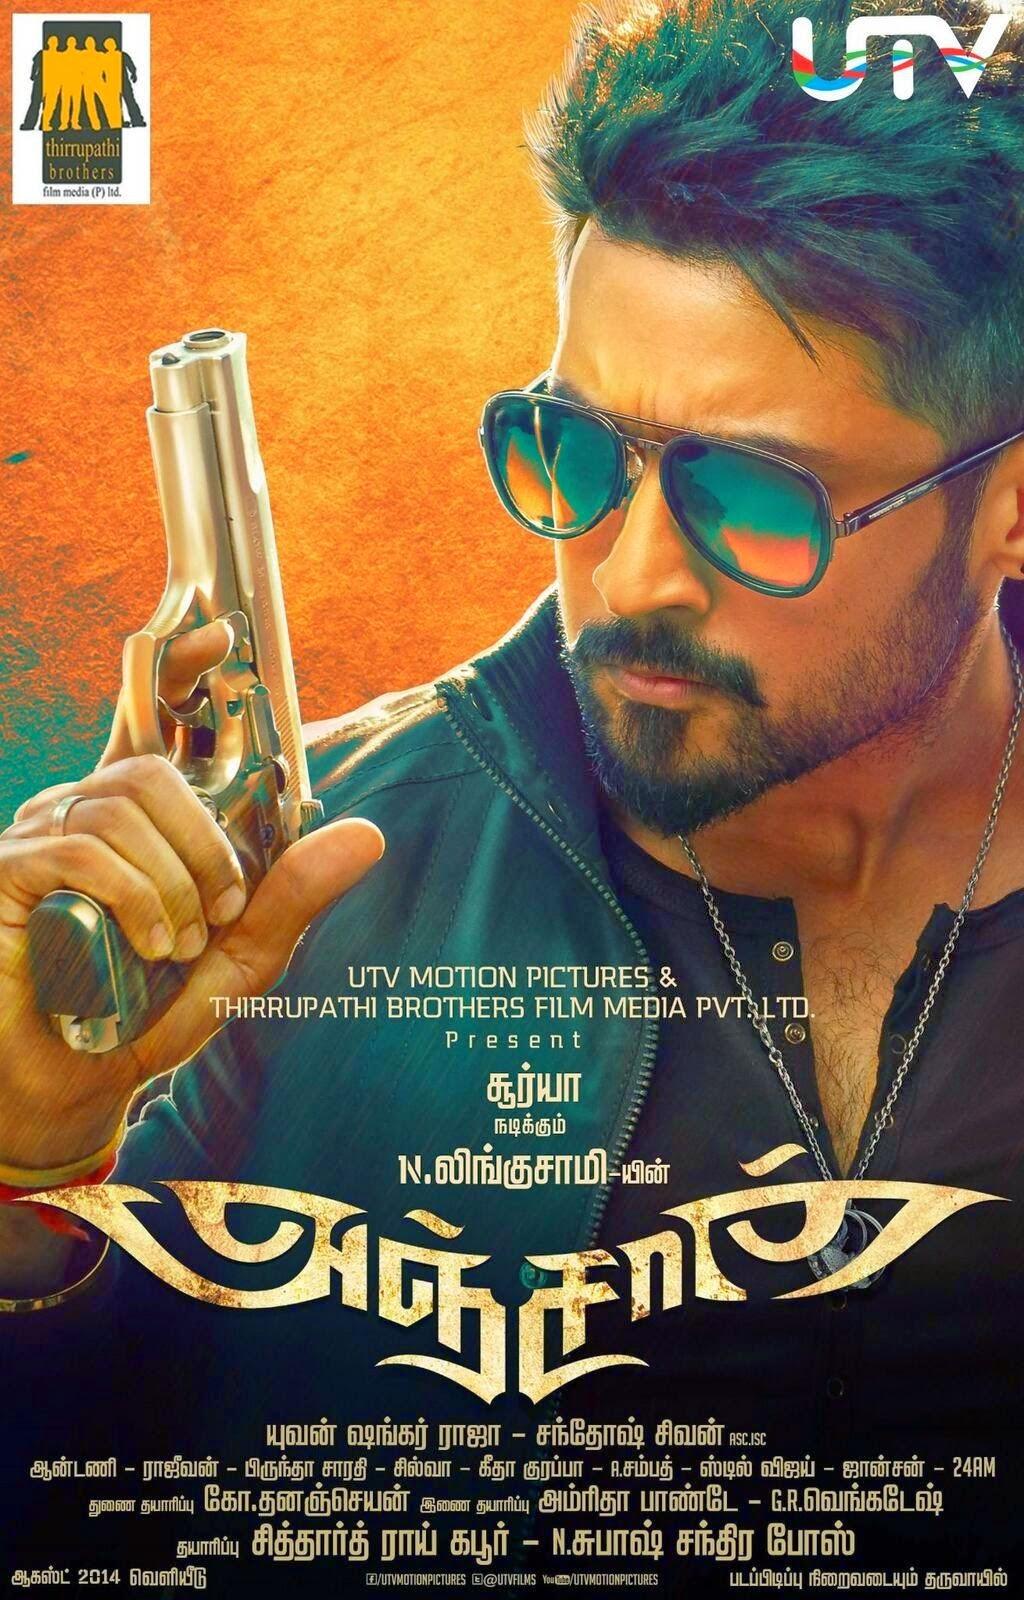 Anjaan Working Stills and latest wallpaper HD Posters